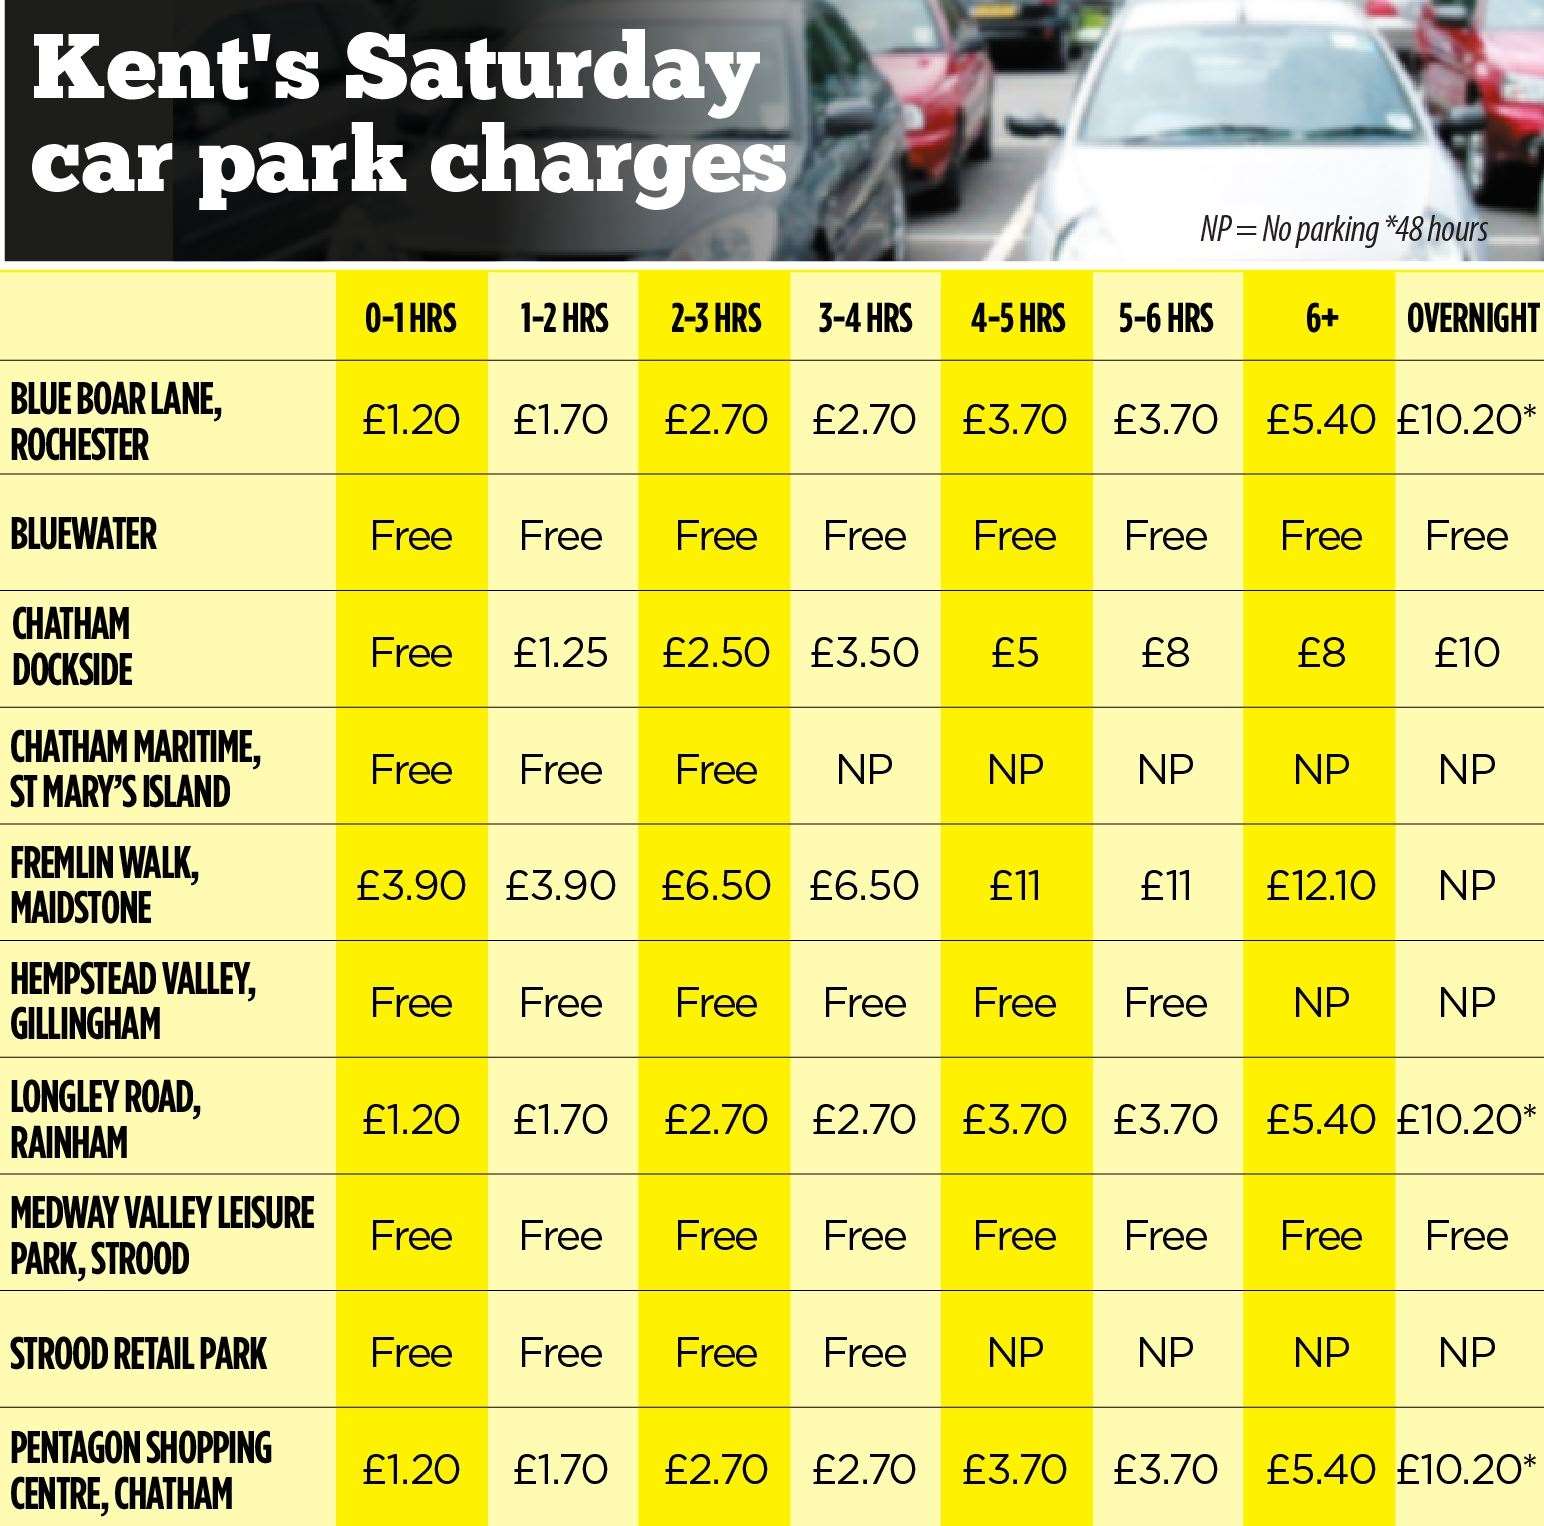 A price comparison with nearby car parks